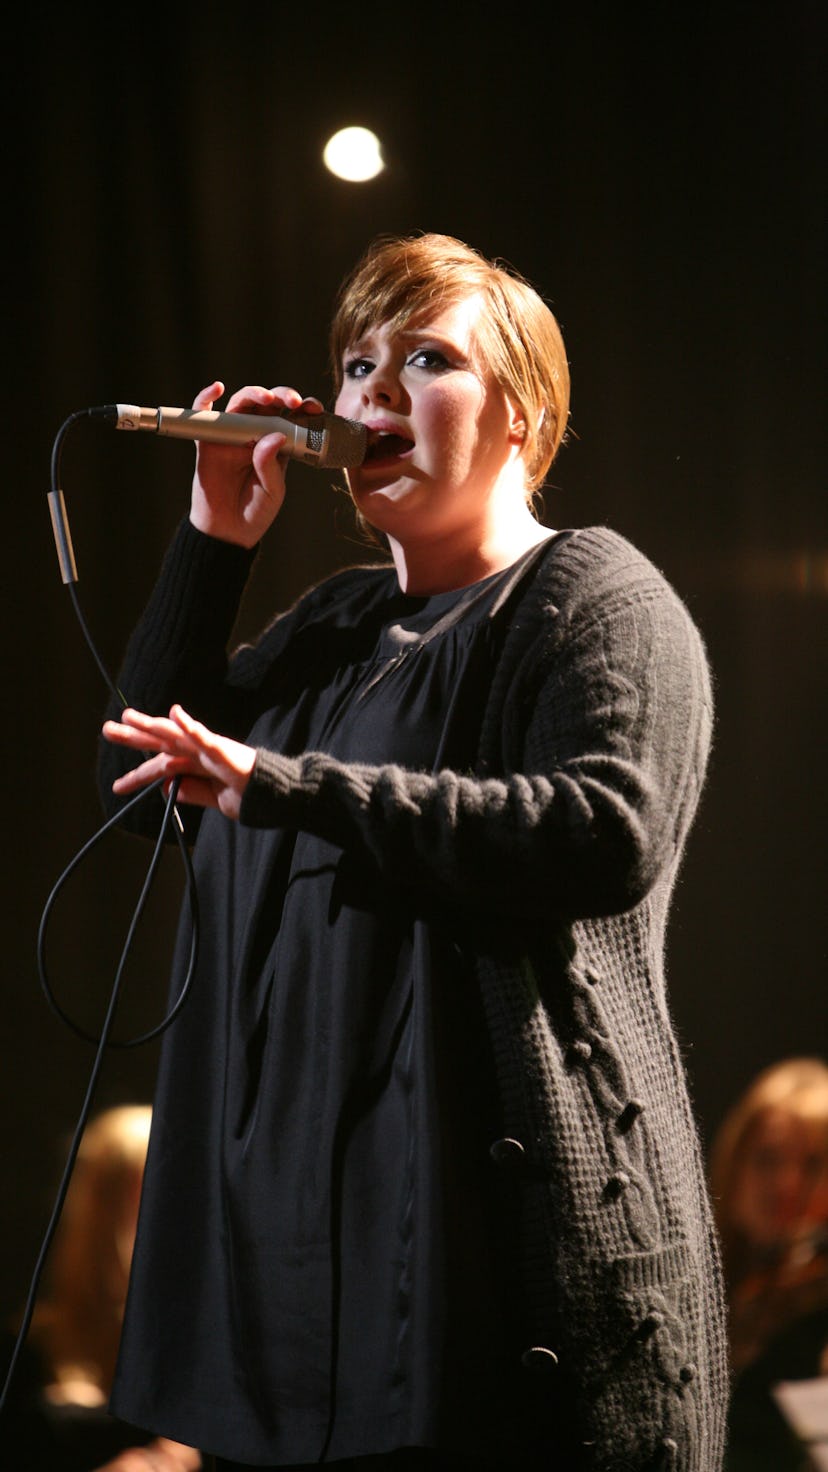 Adele performs on stage at The BRIT Awards 2008 Launch, The Roundhouse, London, 14th January 2008. (...